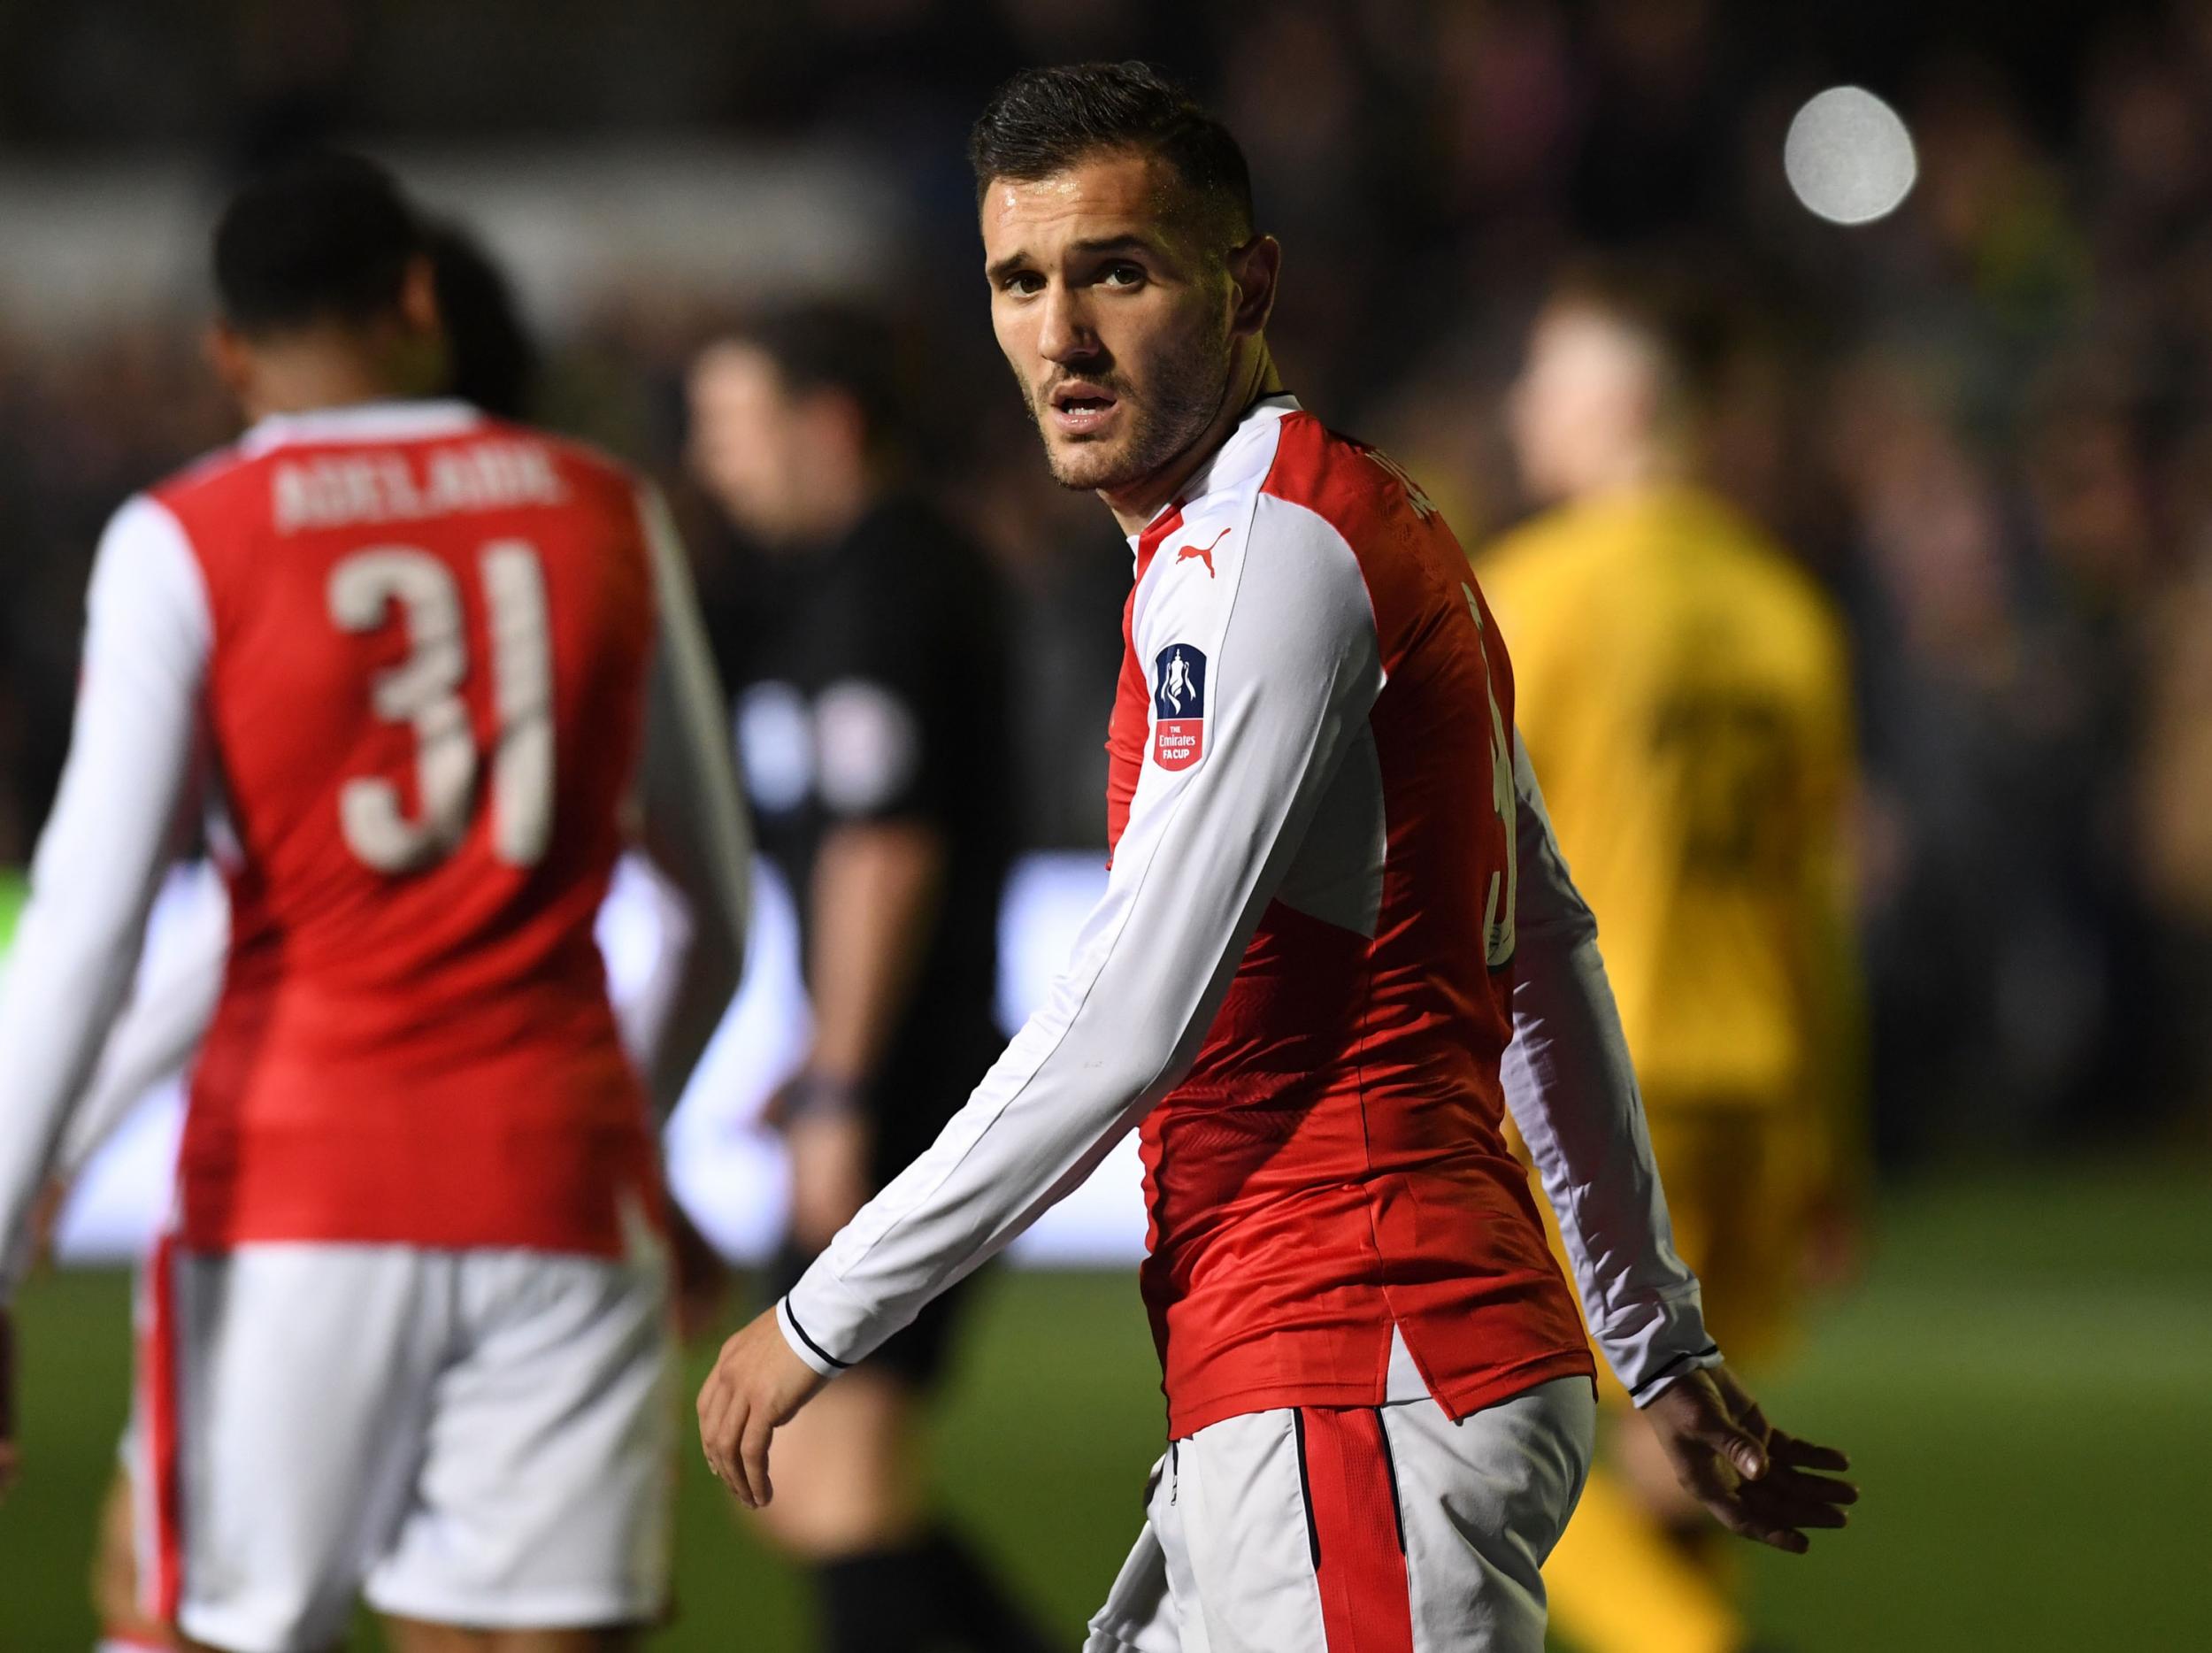 Perez has failed to make an immediate impression at Arsenal